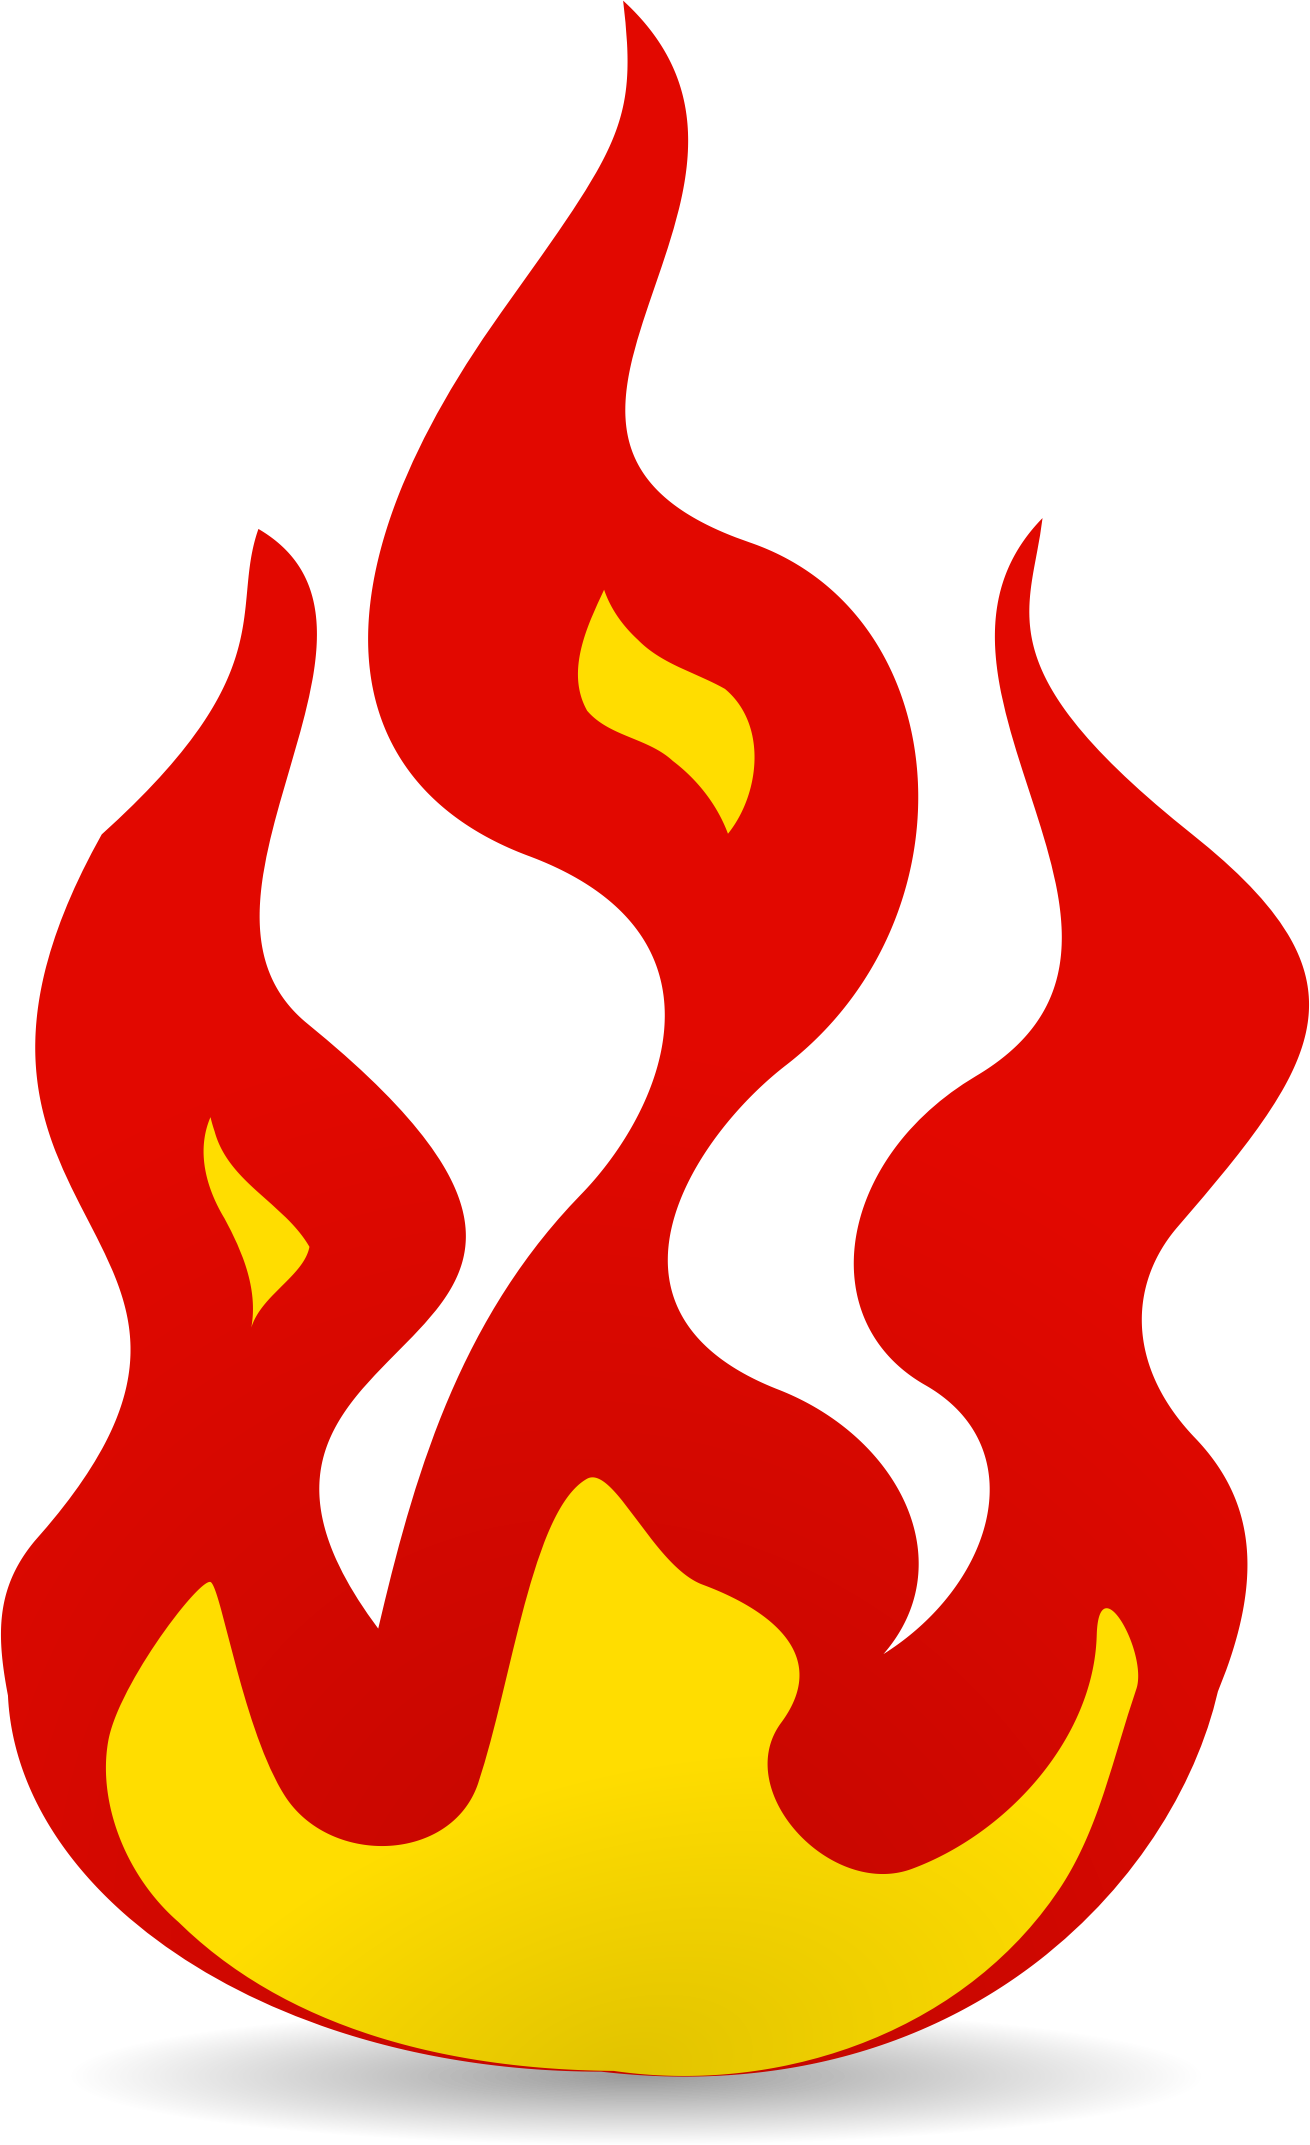 Flame clipart simple.